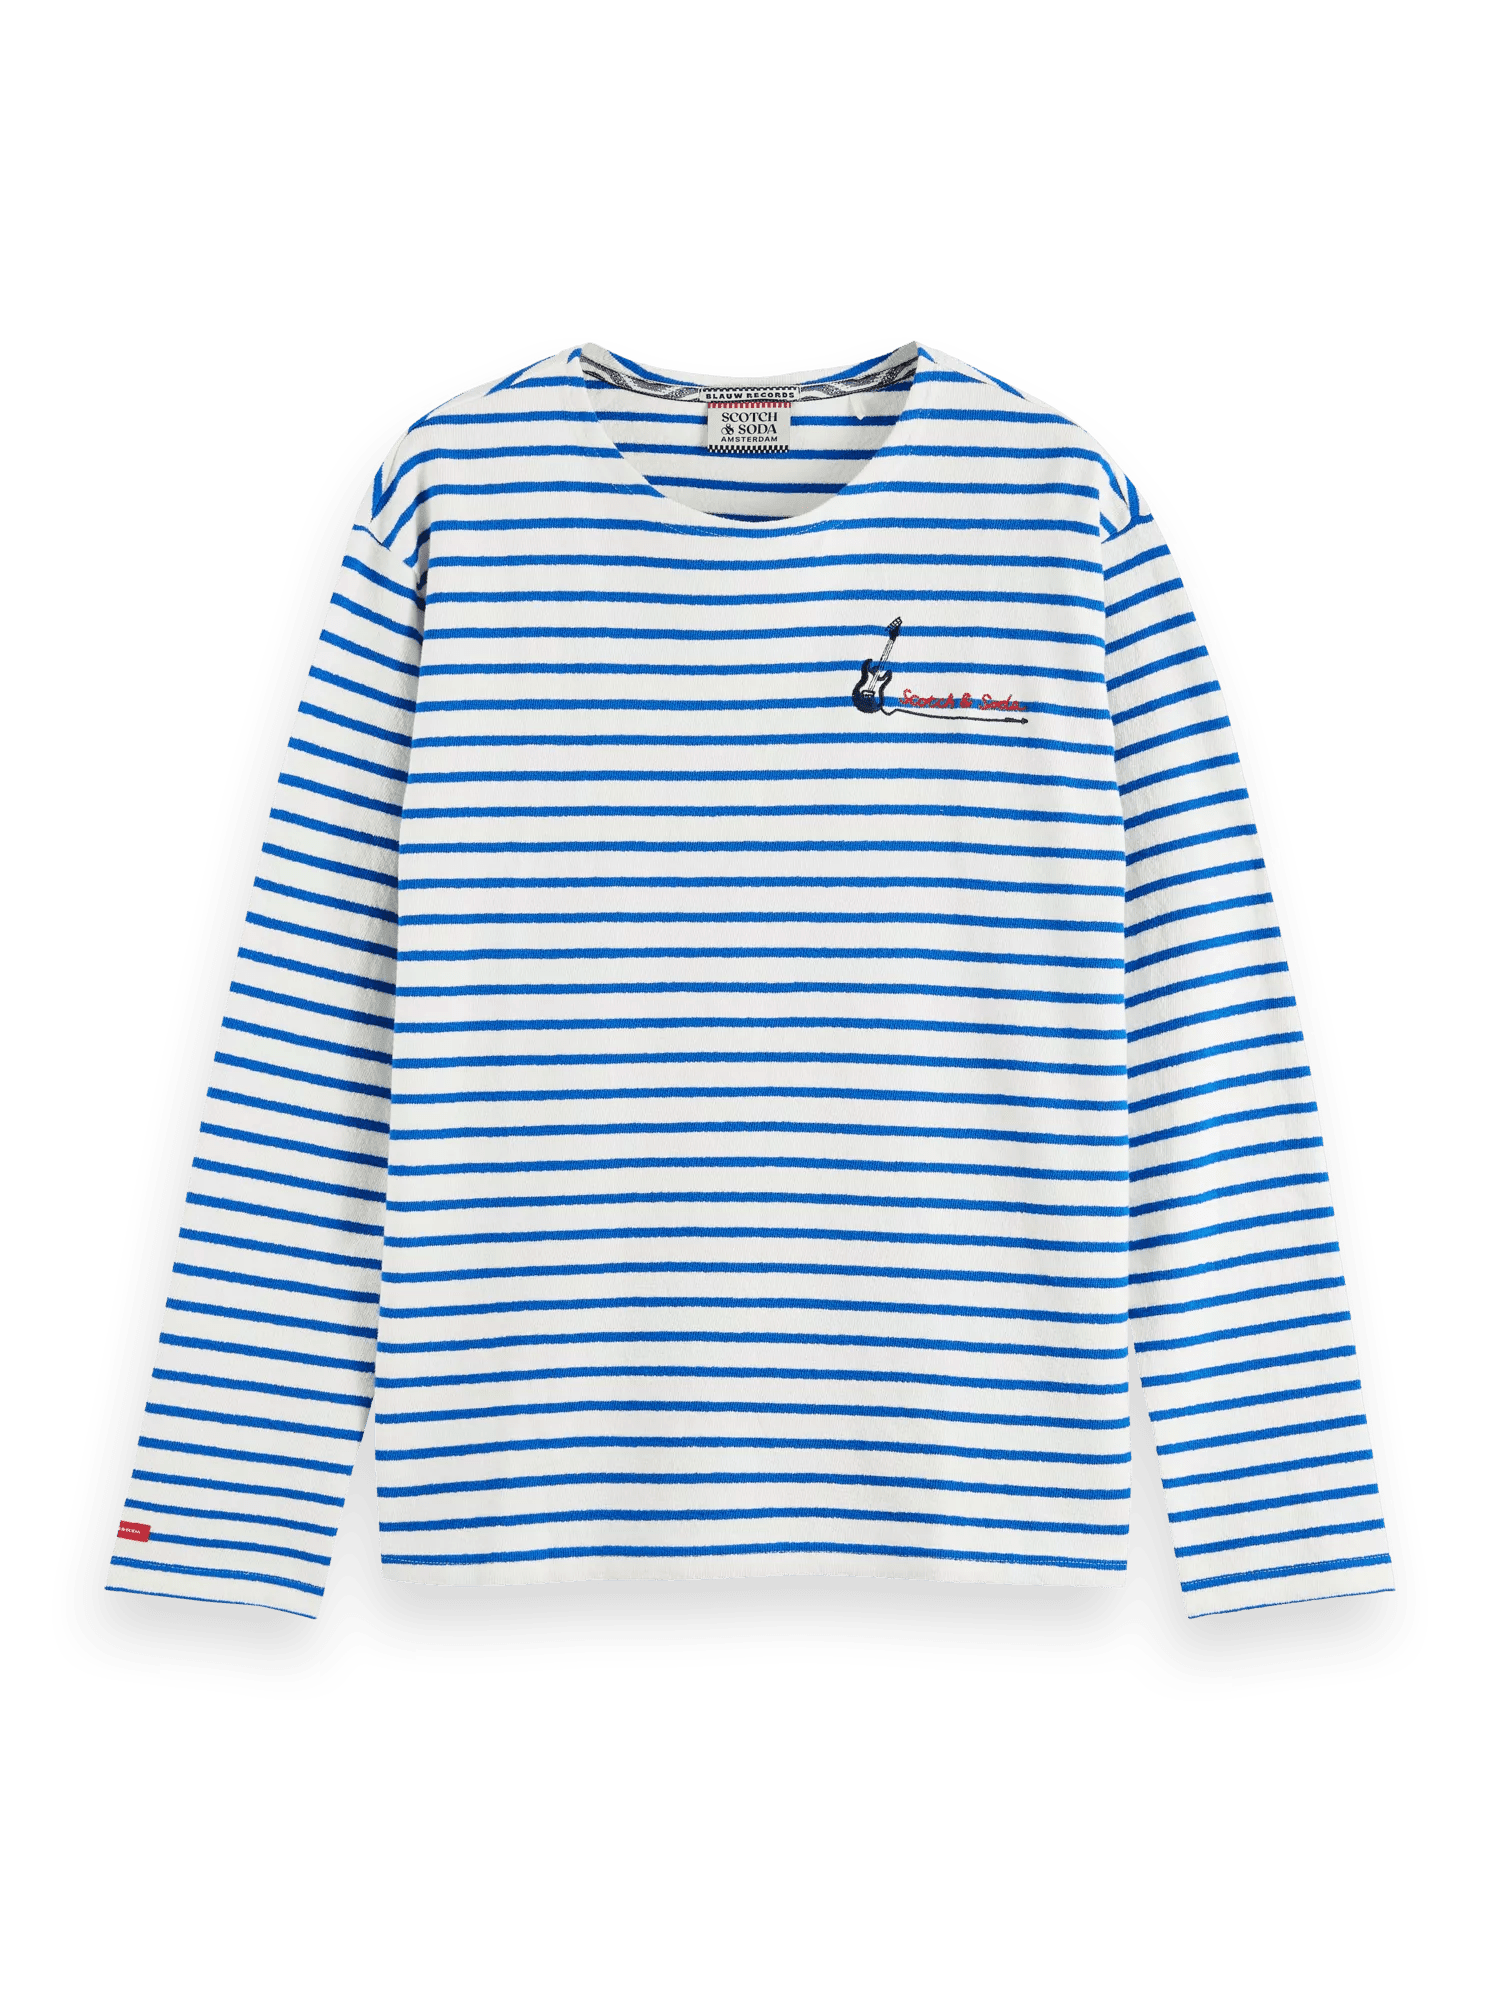 Scotch & Soda Relaxed fit striped long-sleeved T-shirt FNT